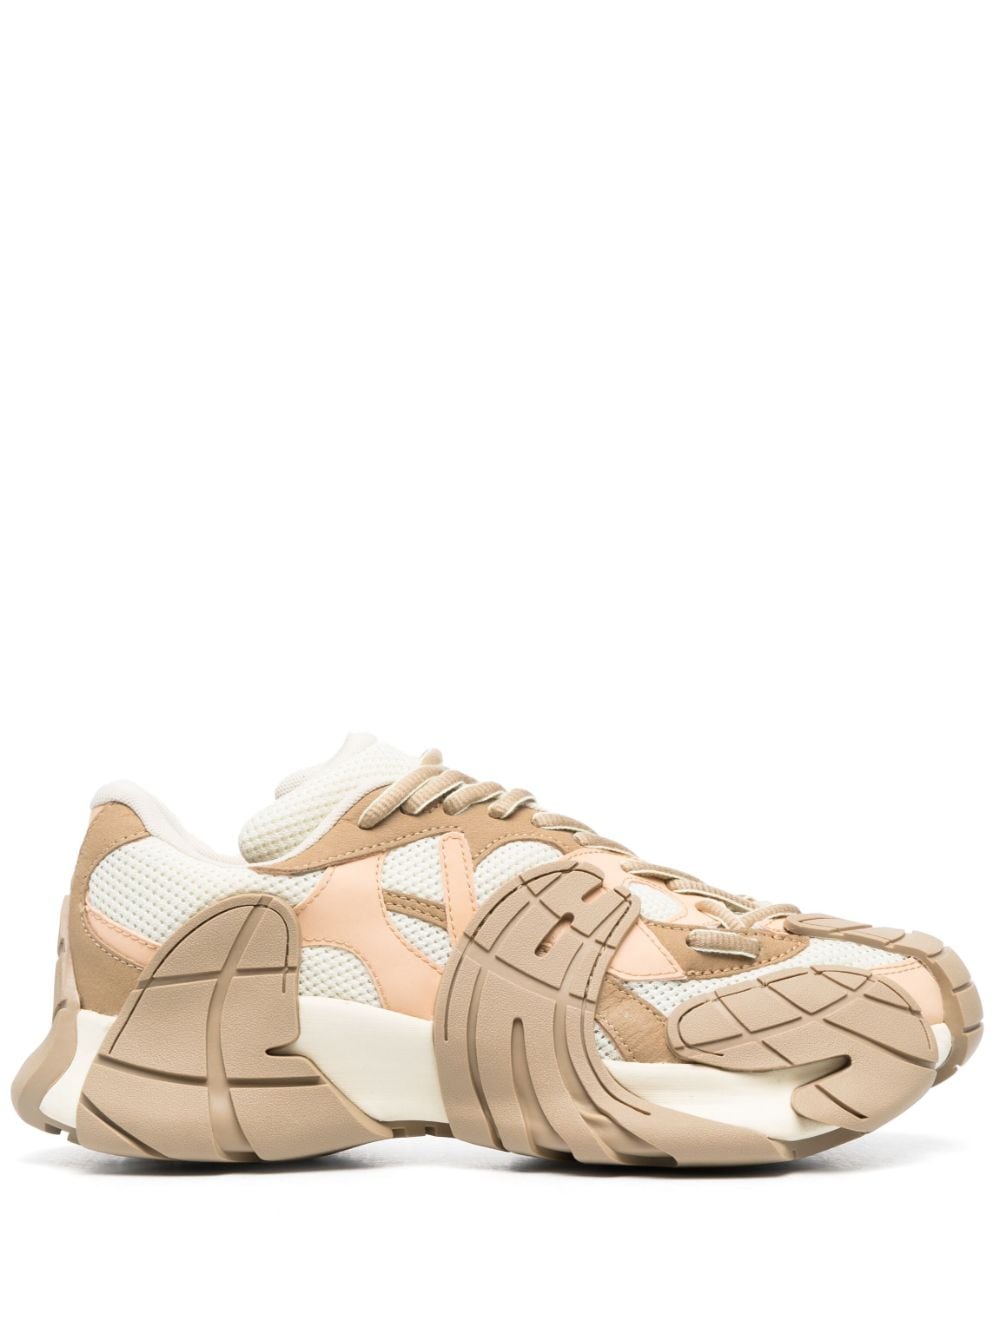 CamperLab lace-up chunky sneakers - Neutrals von CamperLab